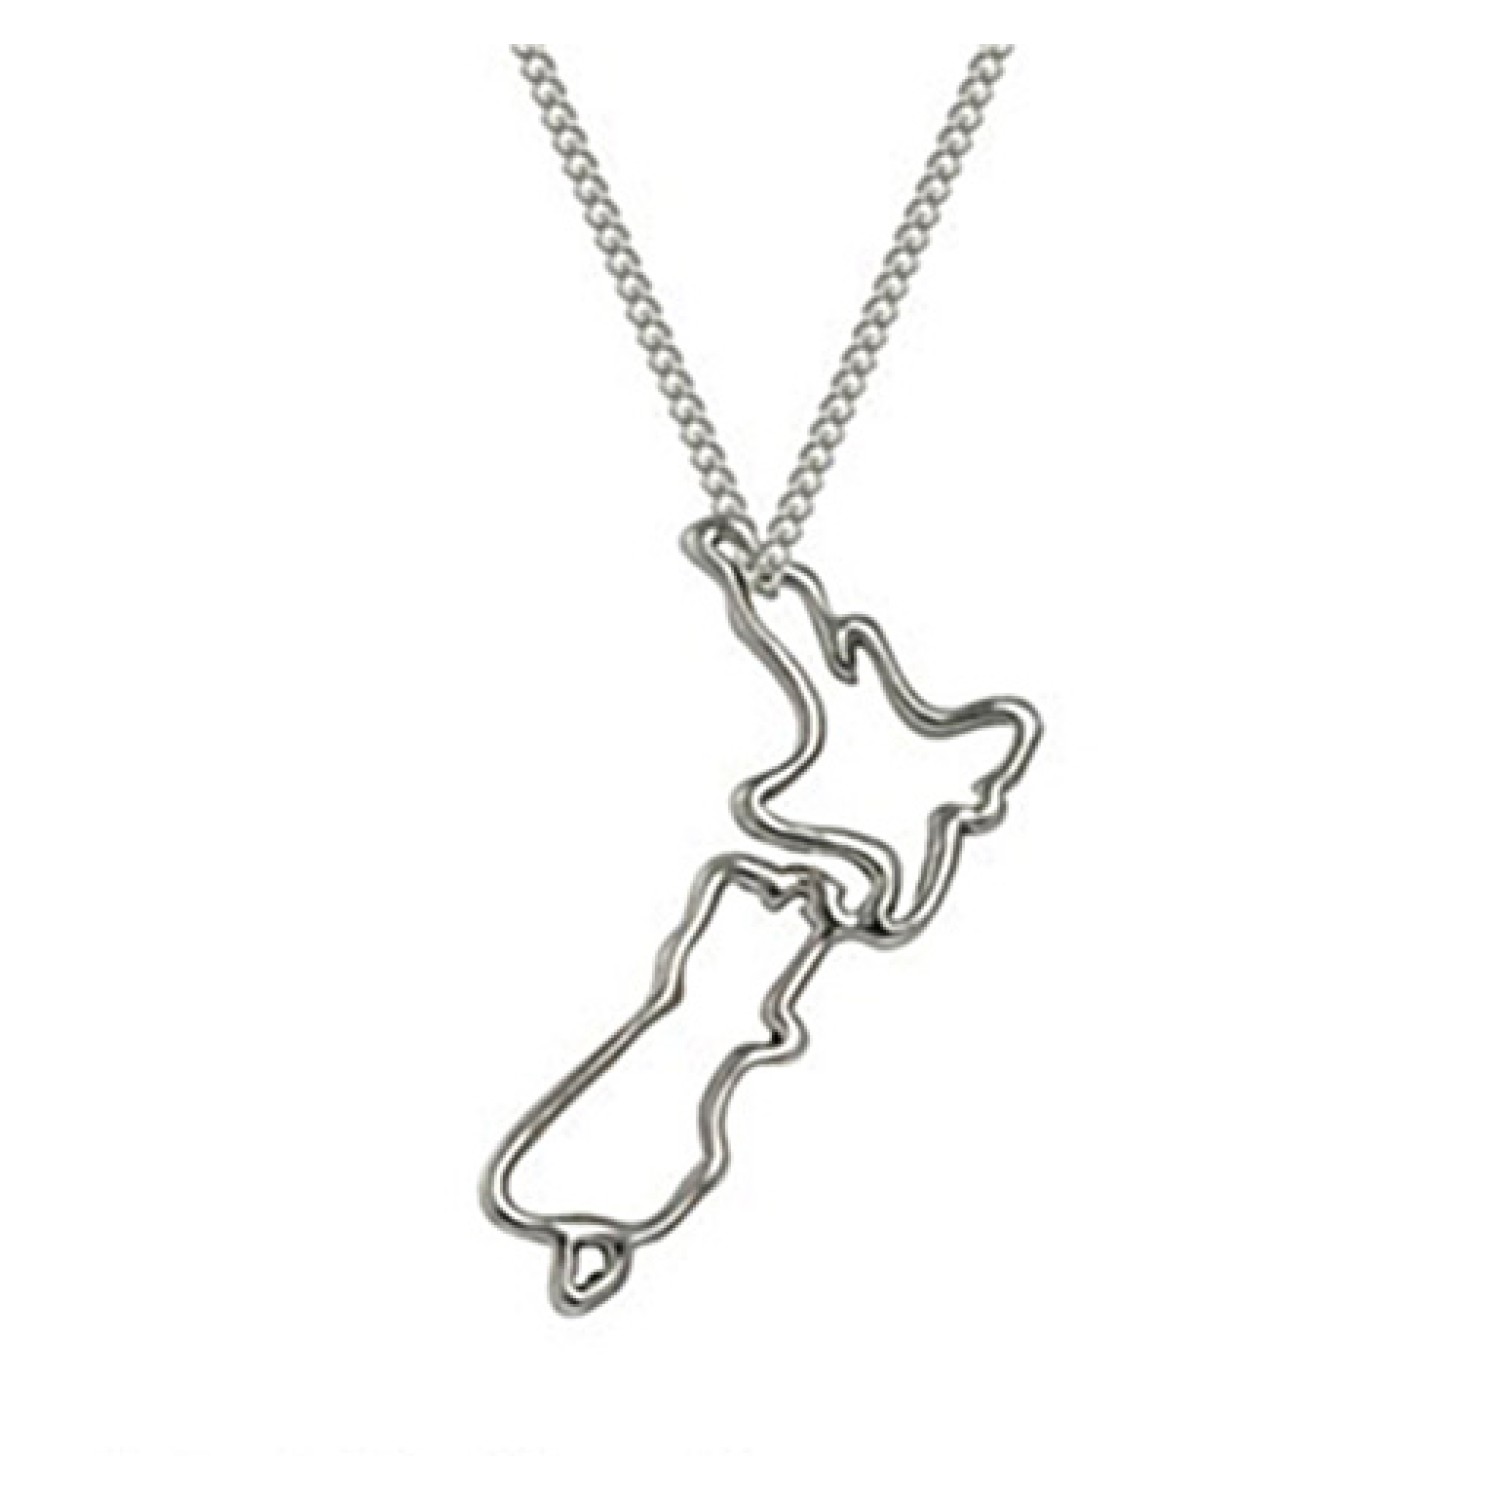 Evolve New Zealand Map Necklace. The stunning New Zealand Map of New Zealand Pendant as worn by New Zealands Eliza McCartney as she claimed  bronze medal in pole vault at Rio 2016 Crafted in Sterling Silver Map is 34mm in length Christies exc @christies.o